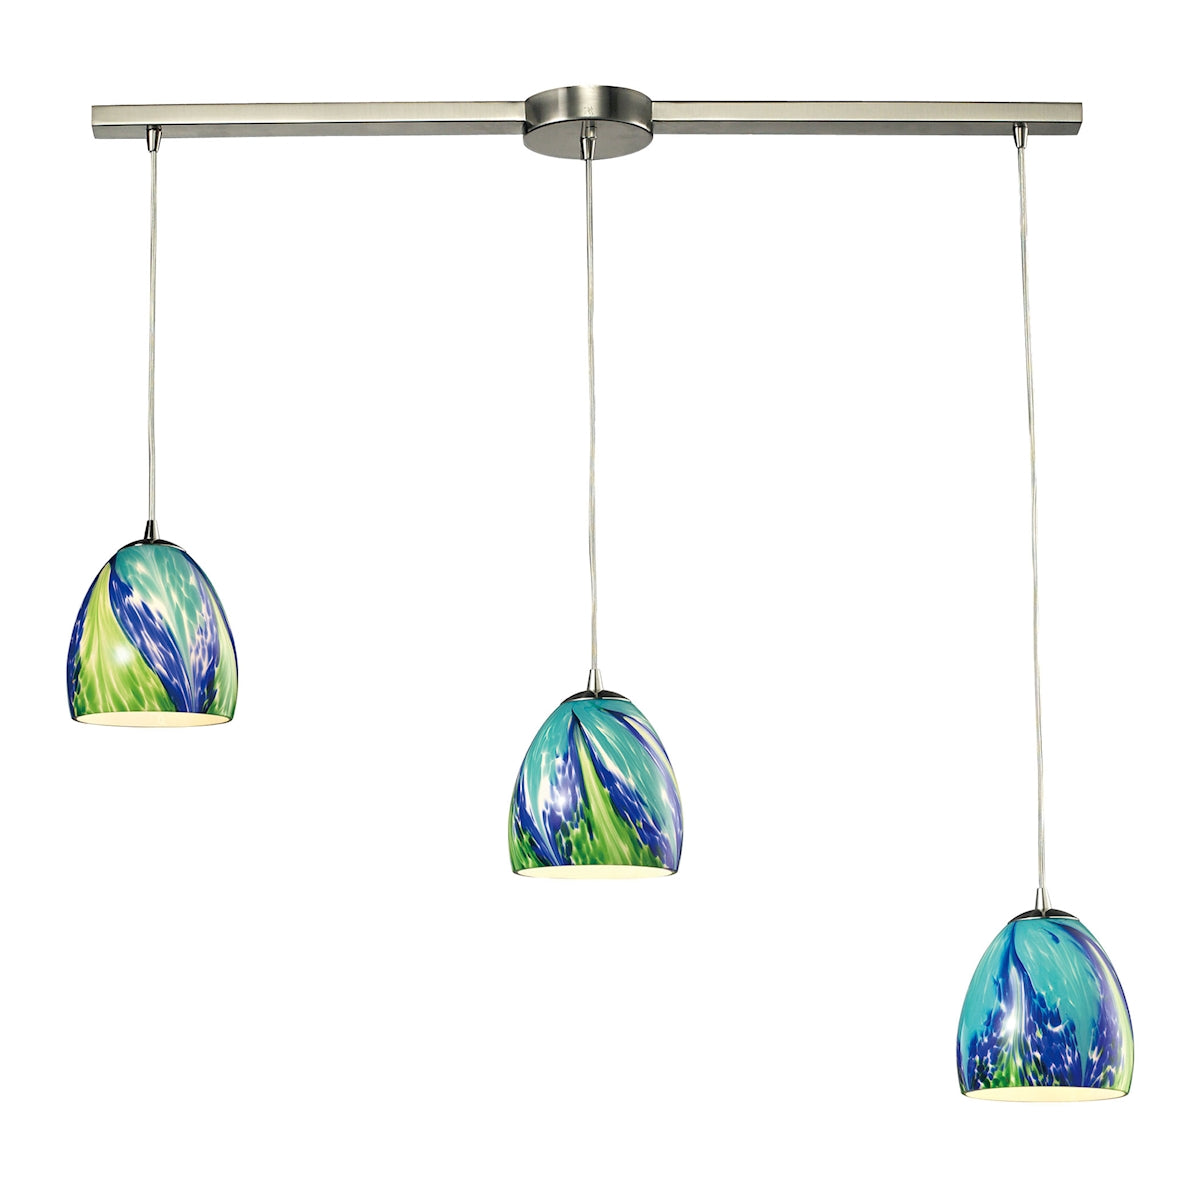 ELK Lighting 31445/3L-TB Colorwave 3-Light Linear Pendant Fixture in Satin Nickel with Blue and Green Glass